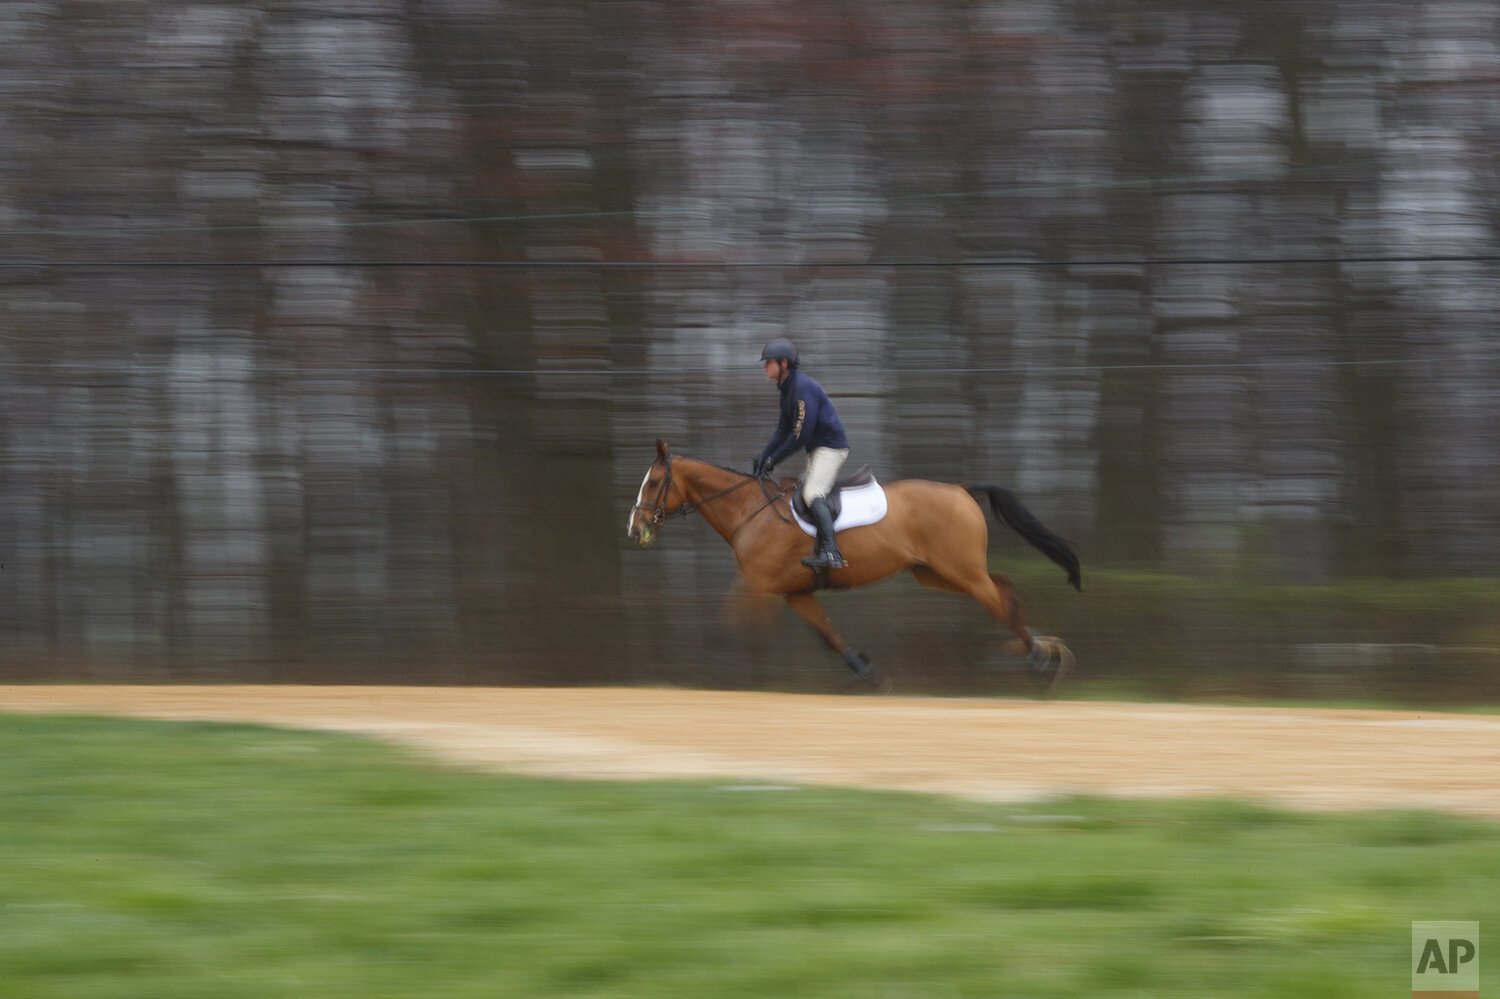  Phillip Dutton, a medal-winning equestrian on the U.S. Olympic team, gallops Quasi Cool during a training session at his farm, Tuesday, March 31, 2020, in West Grove, Pa. (AP Photo/Matt Slocum) 